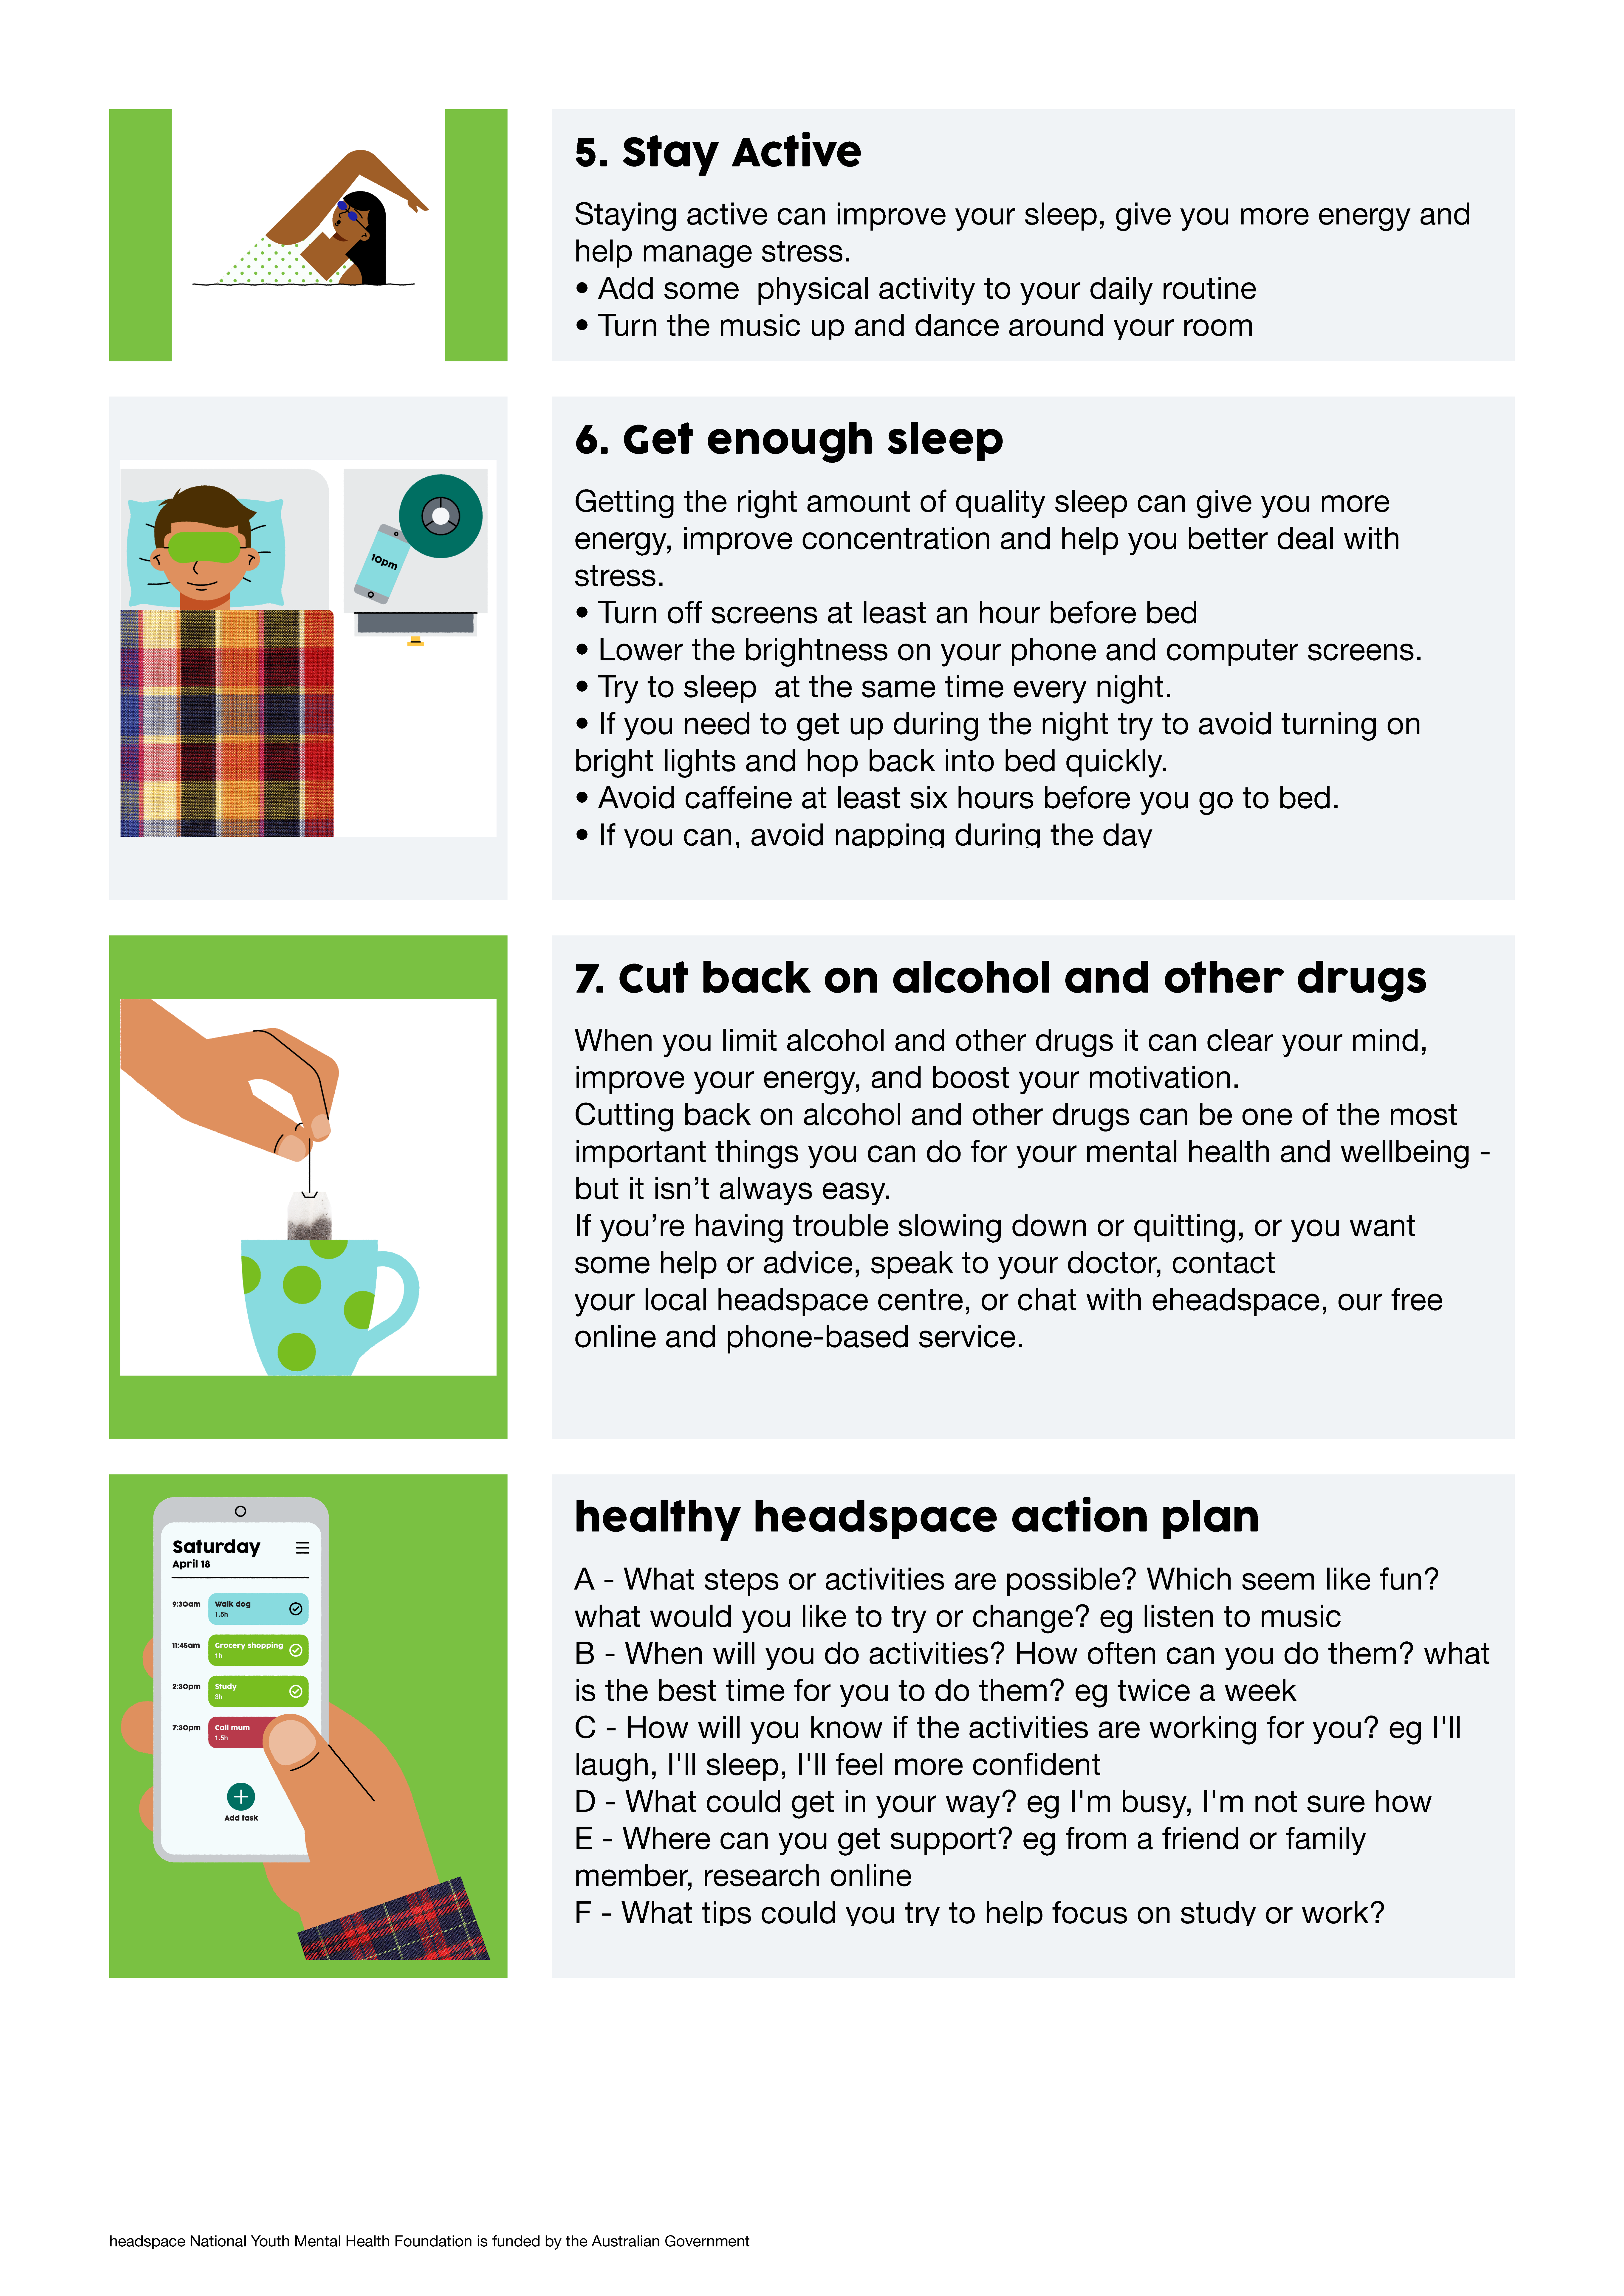 headspace tips Facebook post Page 2